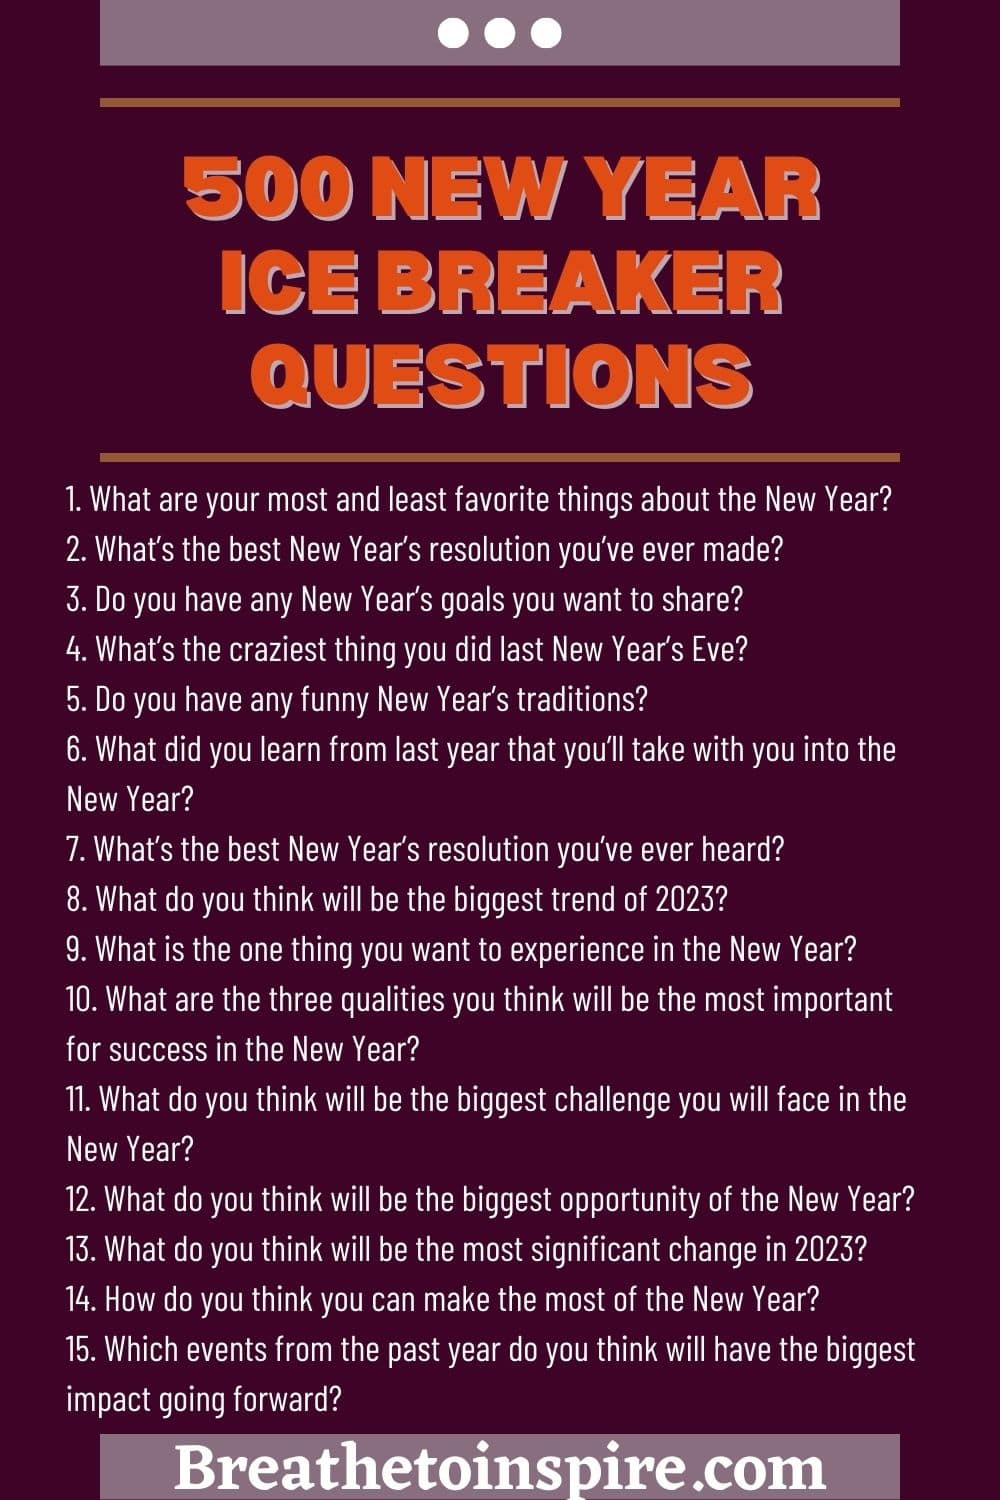 500 New Year Questions To Ask As Ice Breakers Or Conversation Starters ...